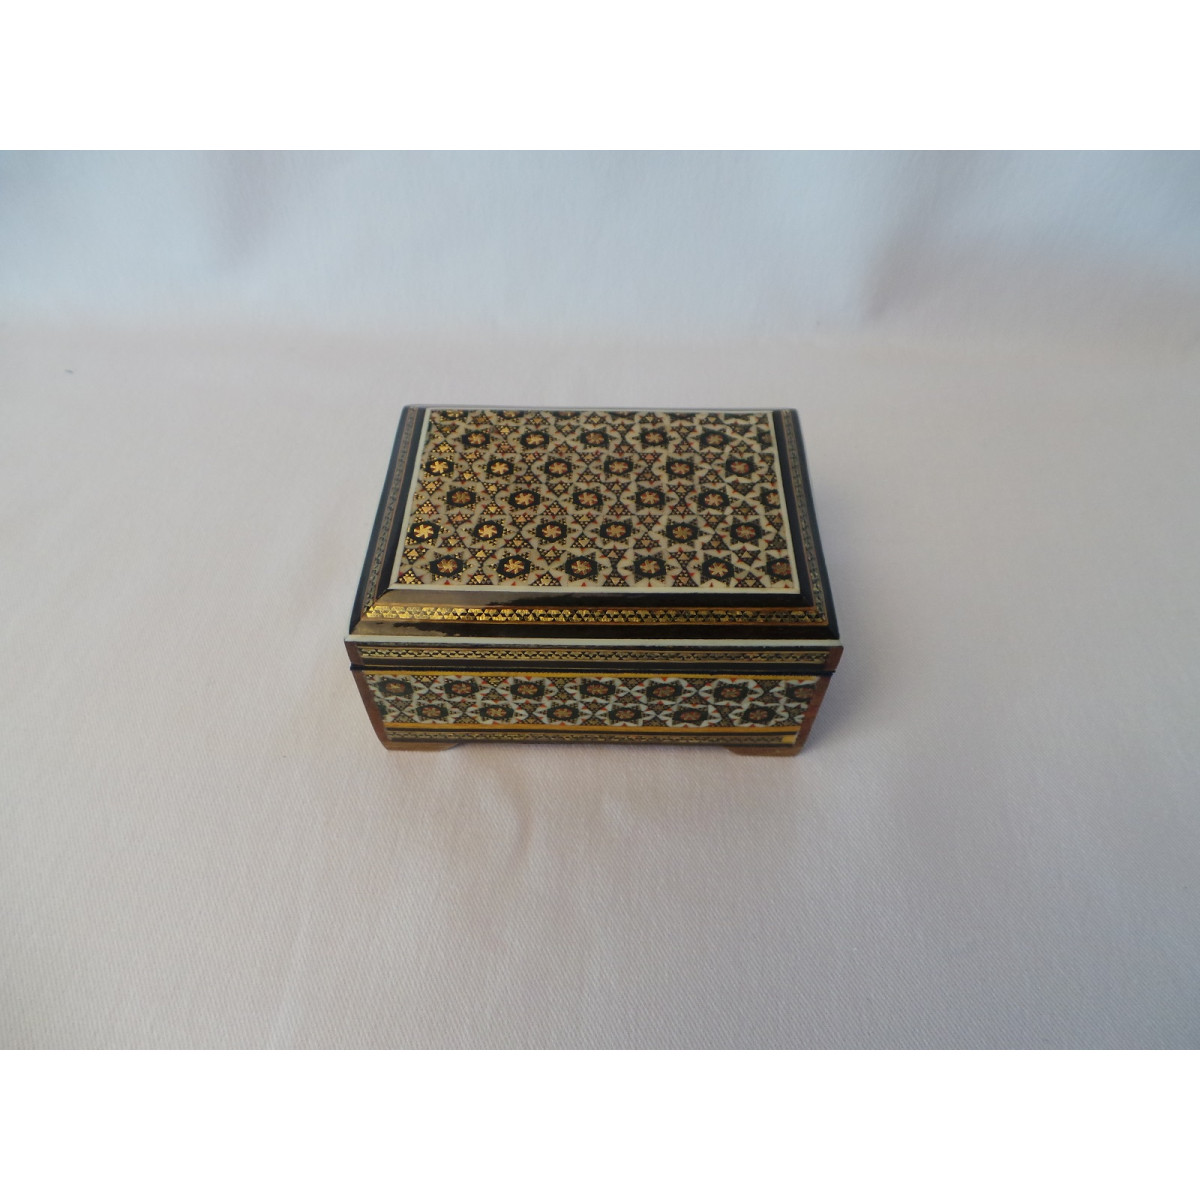 Wood and Copper Inlaying Jewelry Box - HI1012-Persian Handicrafts